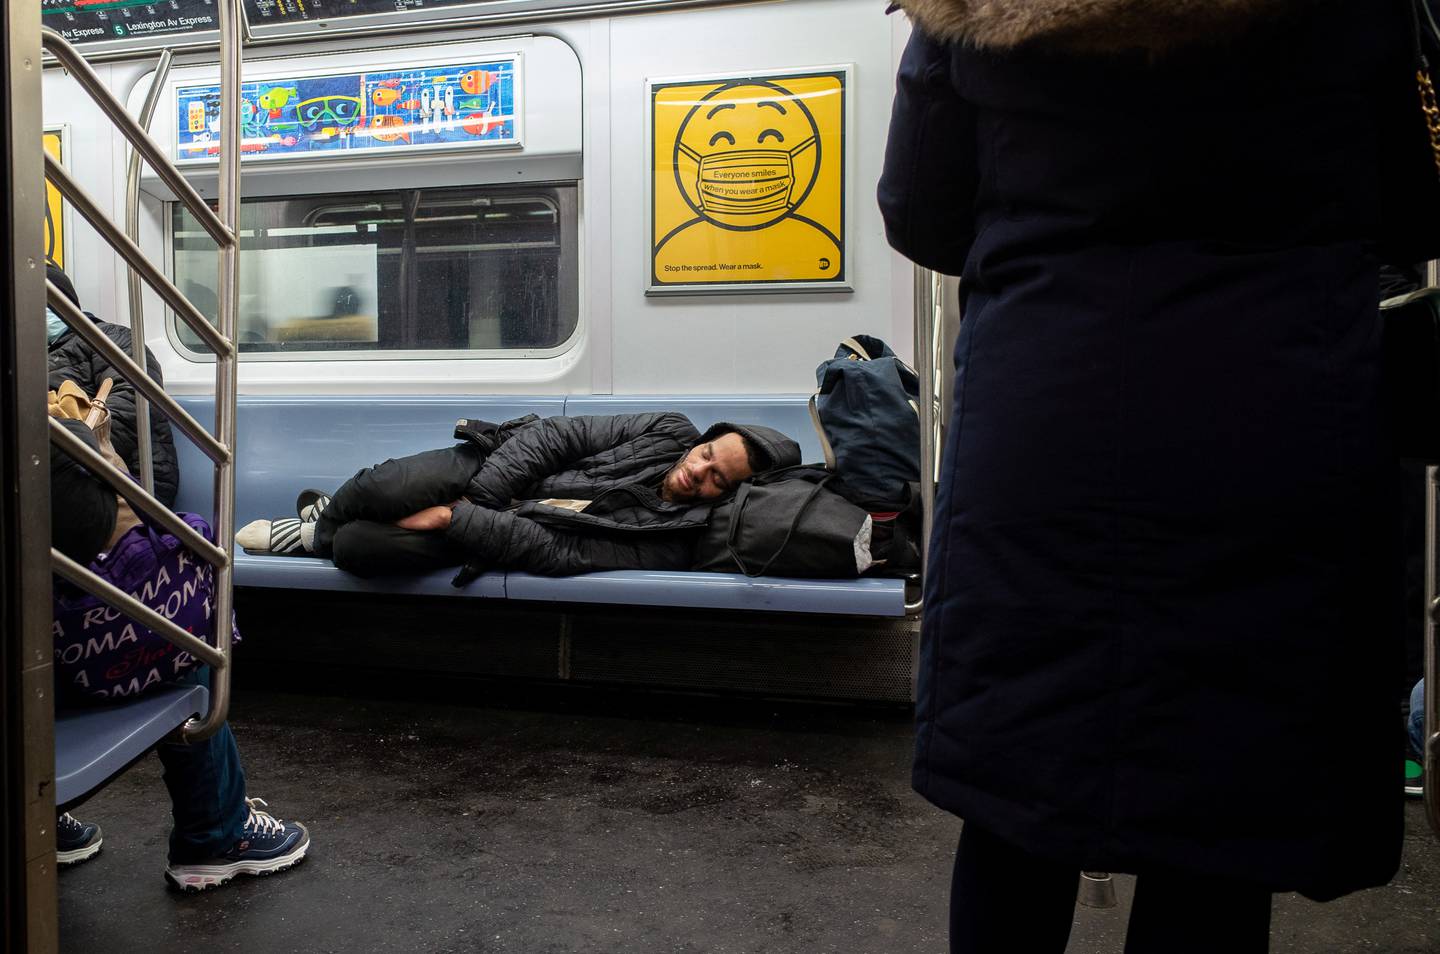 A homeless person sleeps on the subway during rush hour in New York City, February 21. Reuters